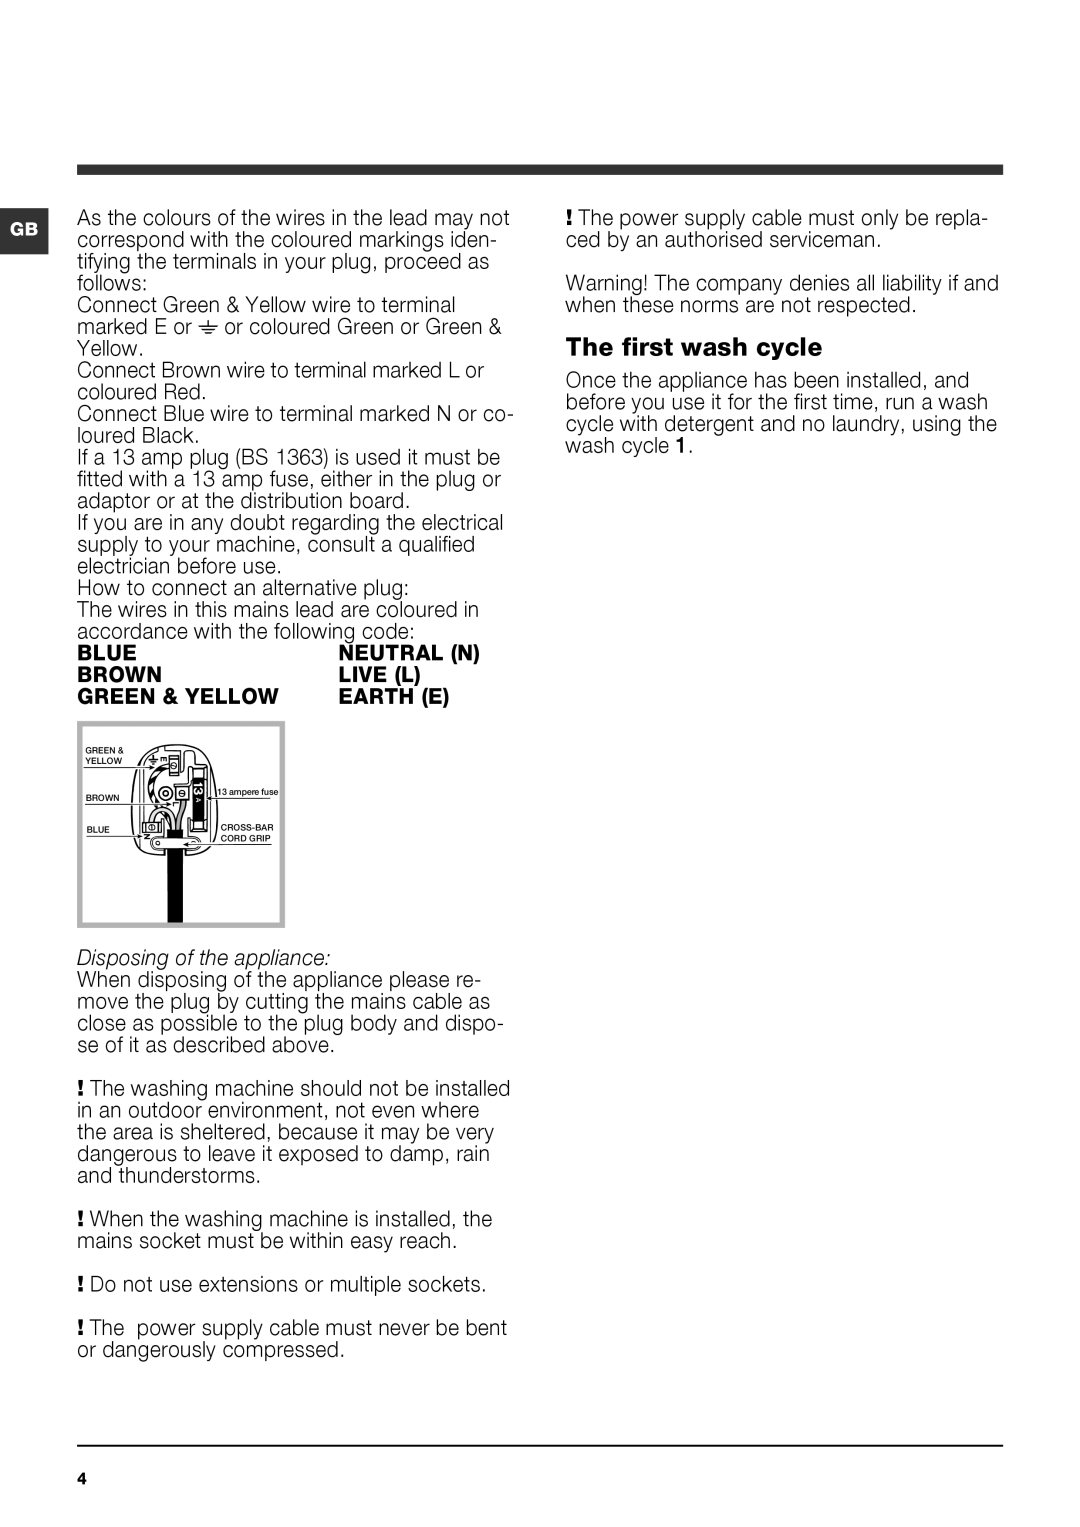 Indesit IWD 6125 manual The first wash cycle, Disposing of the appliance 